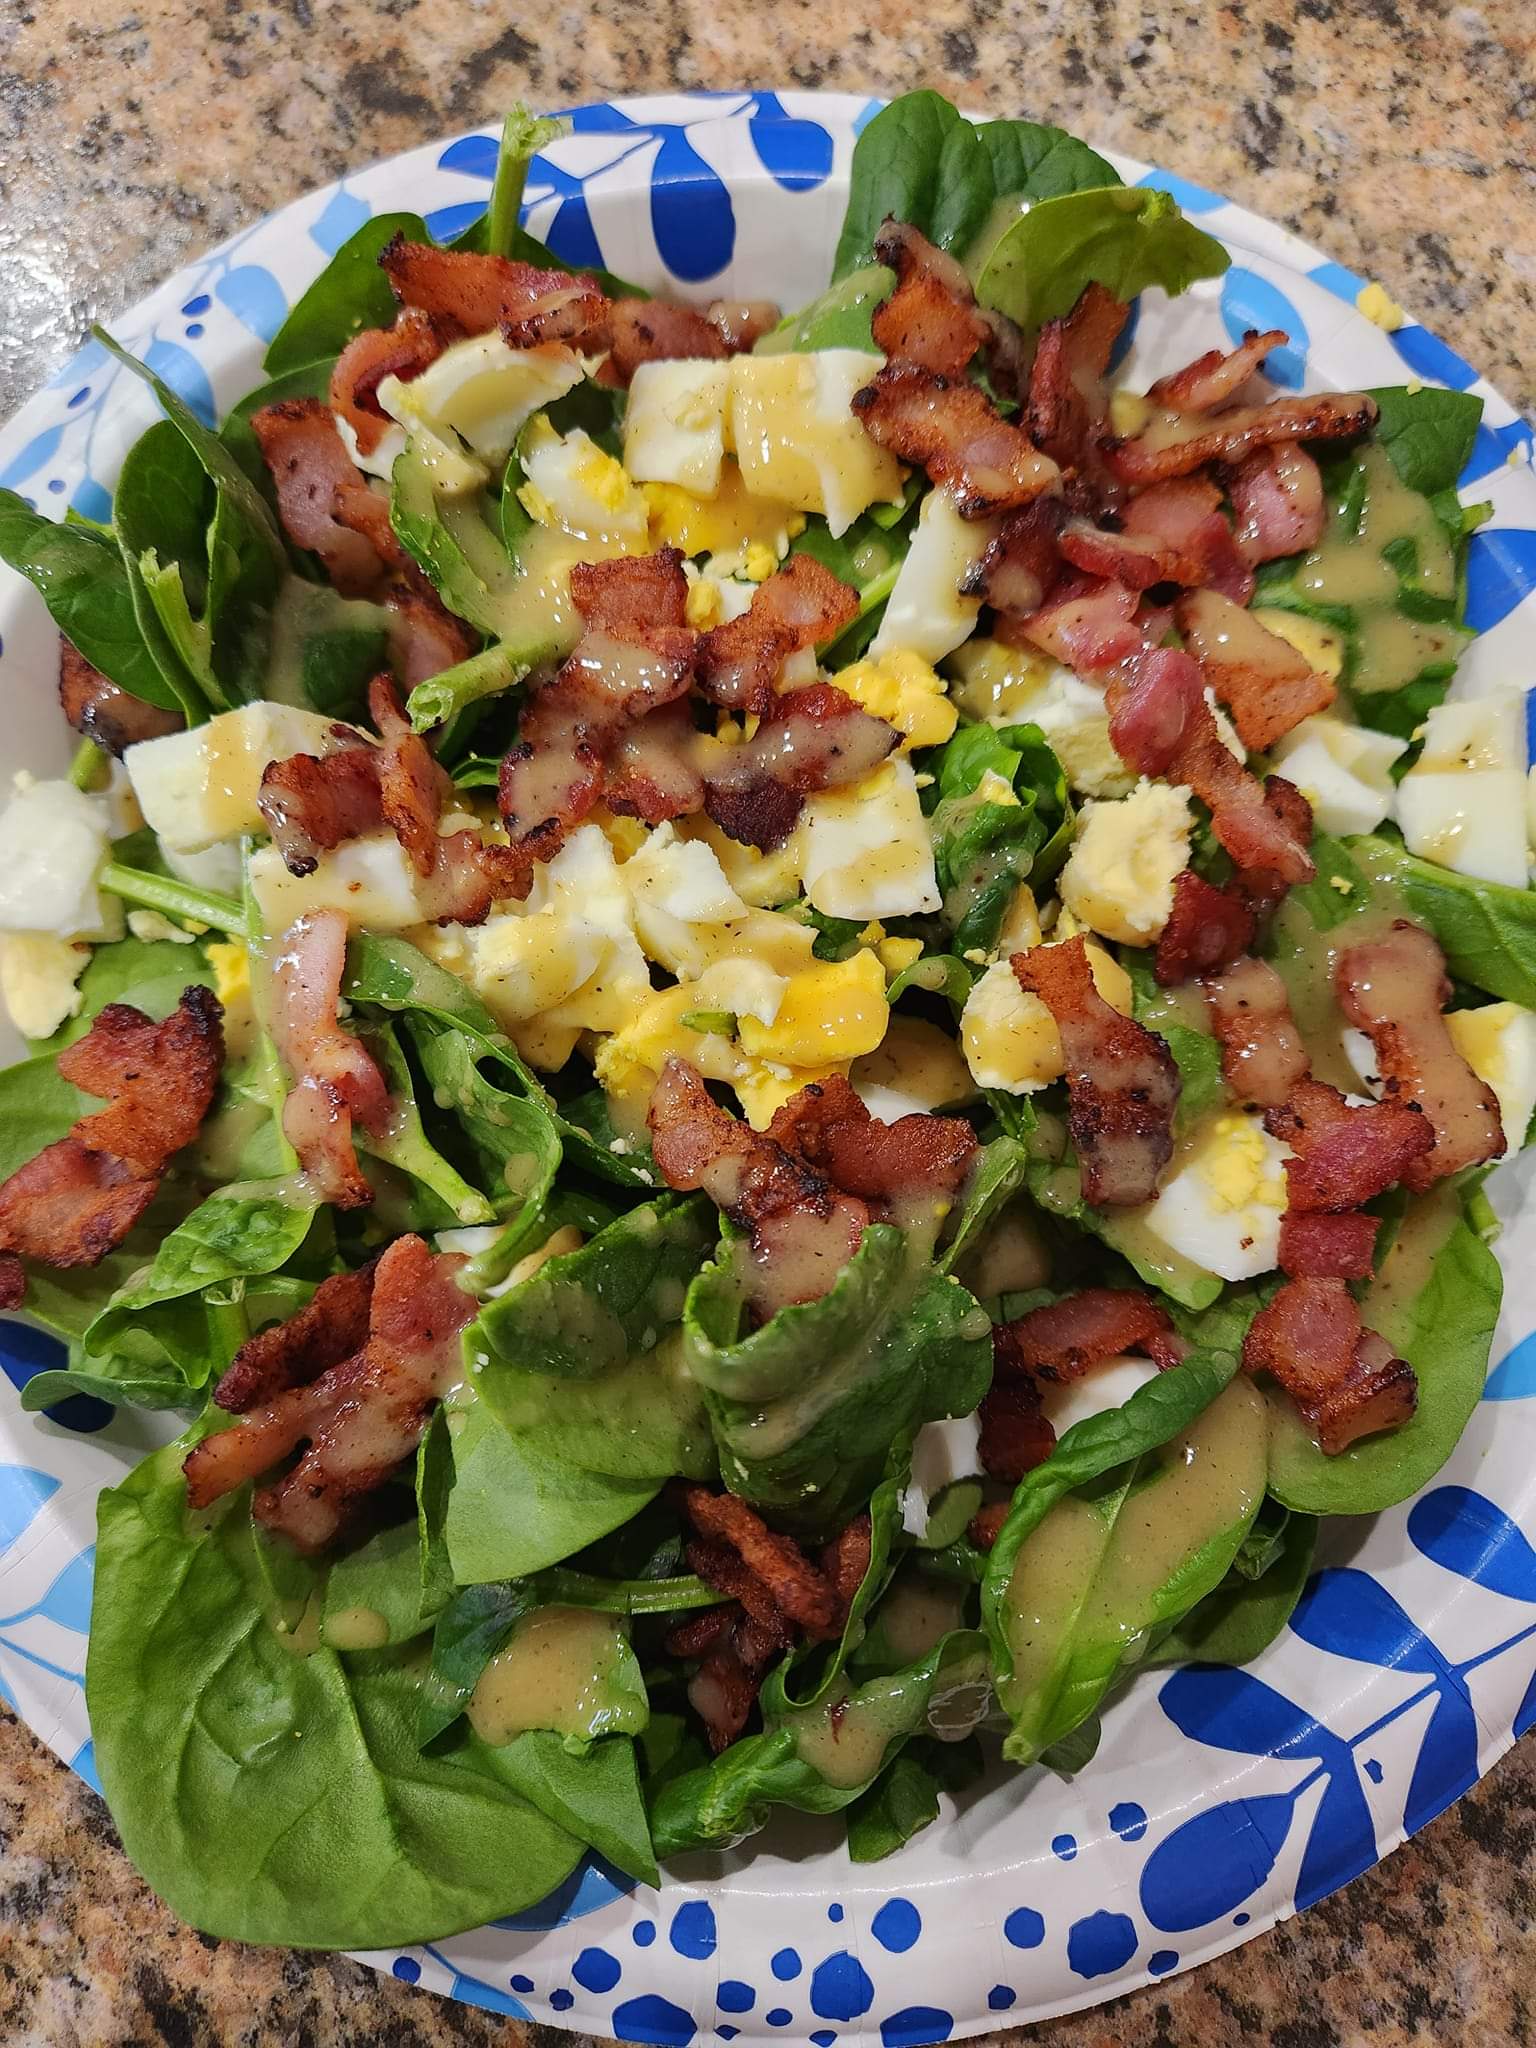 Spinach salad with warn bacon dressing.